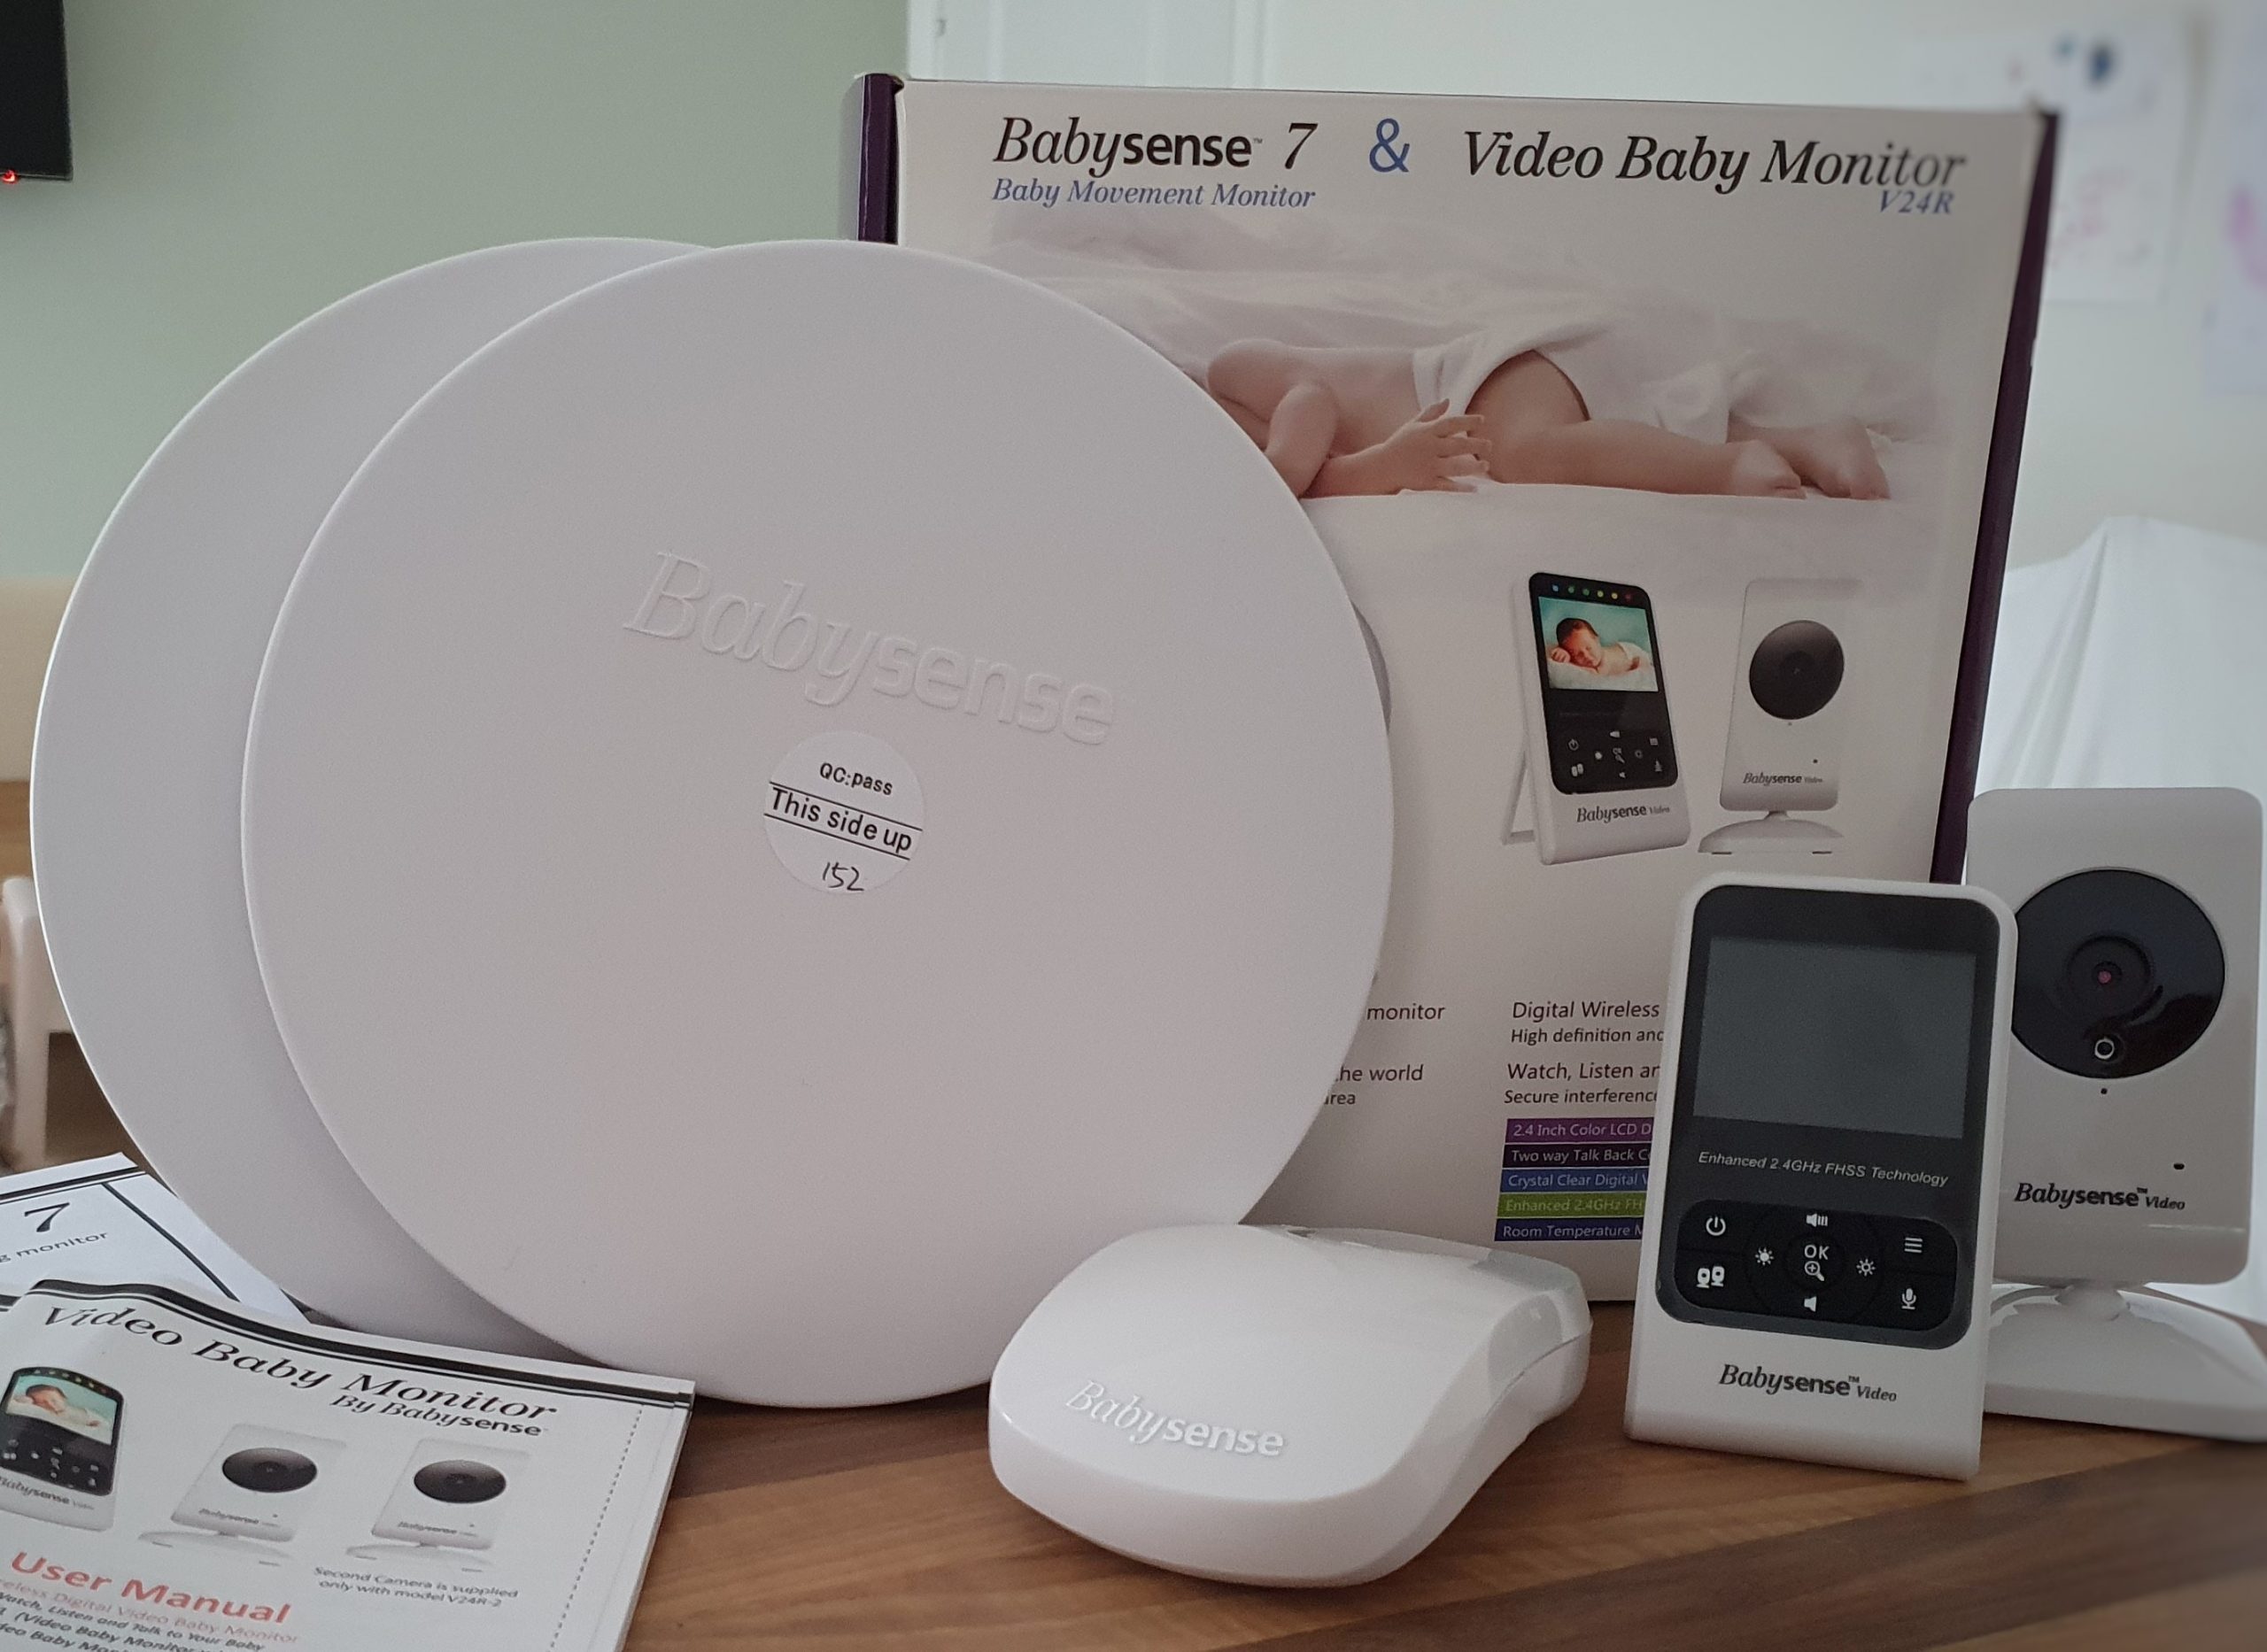 Babysense 7 And Video Baby Monitor V24R, Review – What's Good To Do